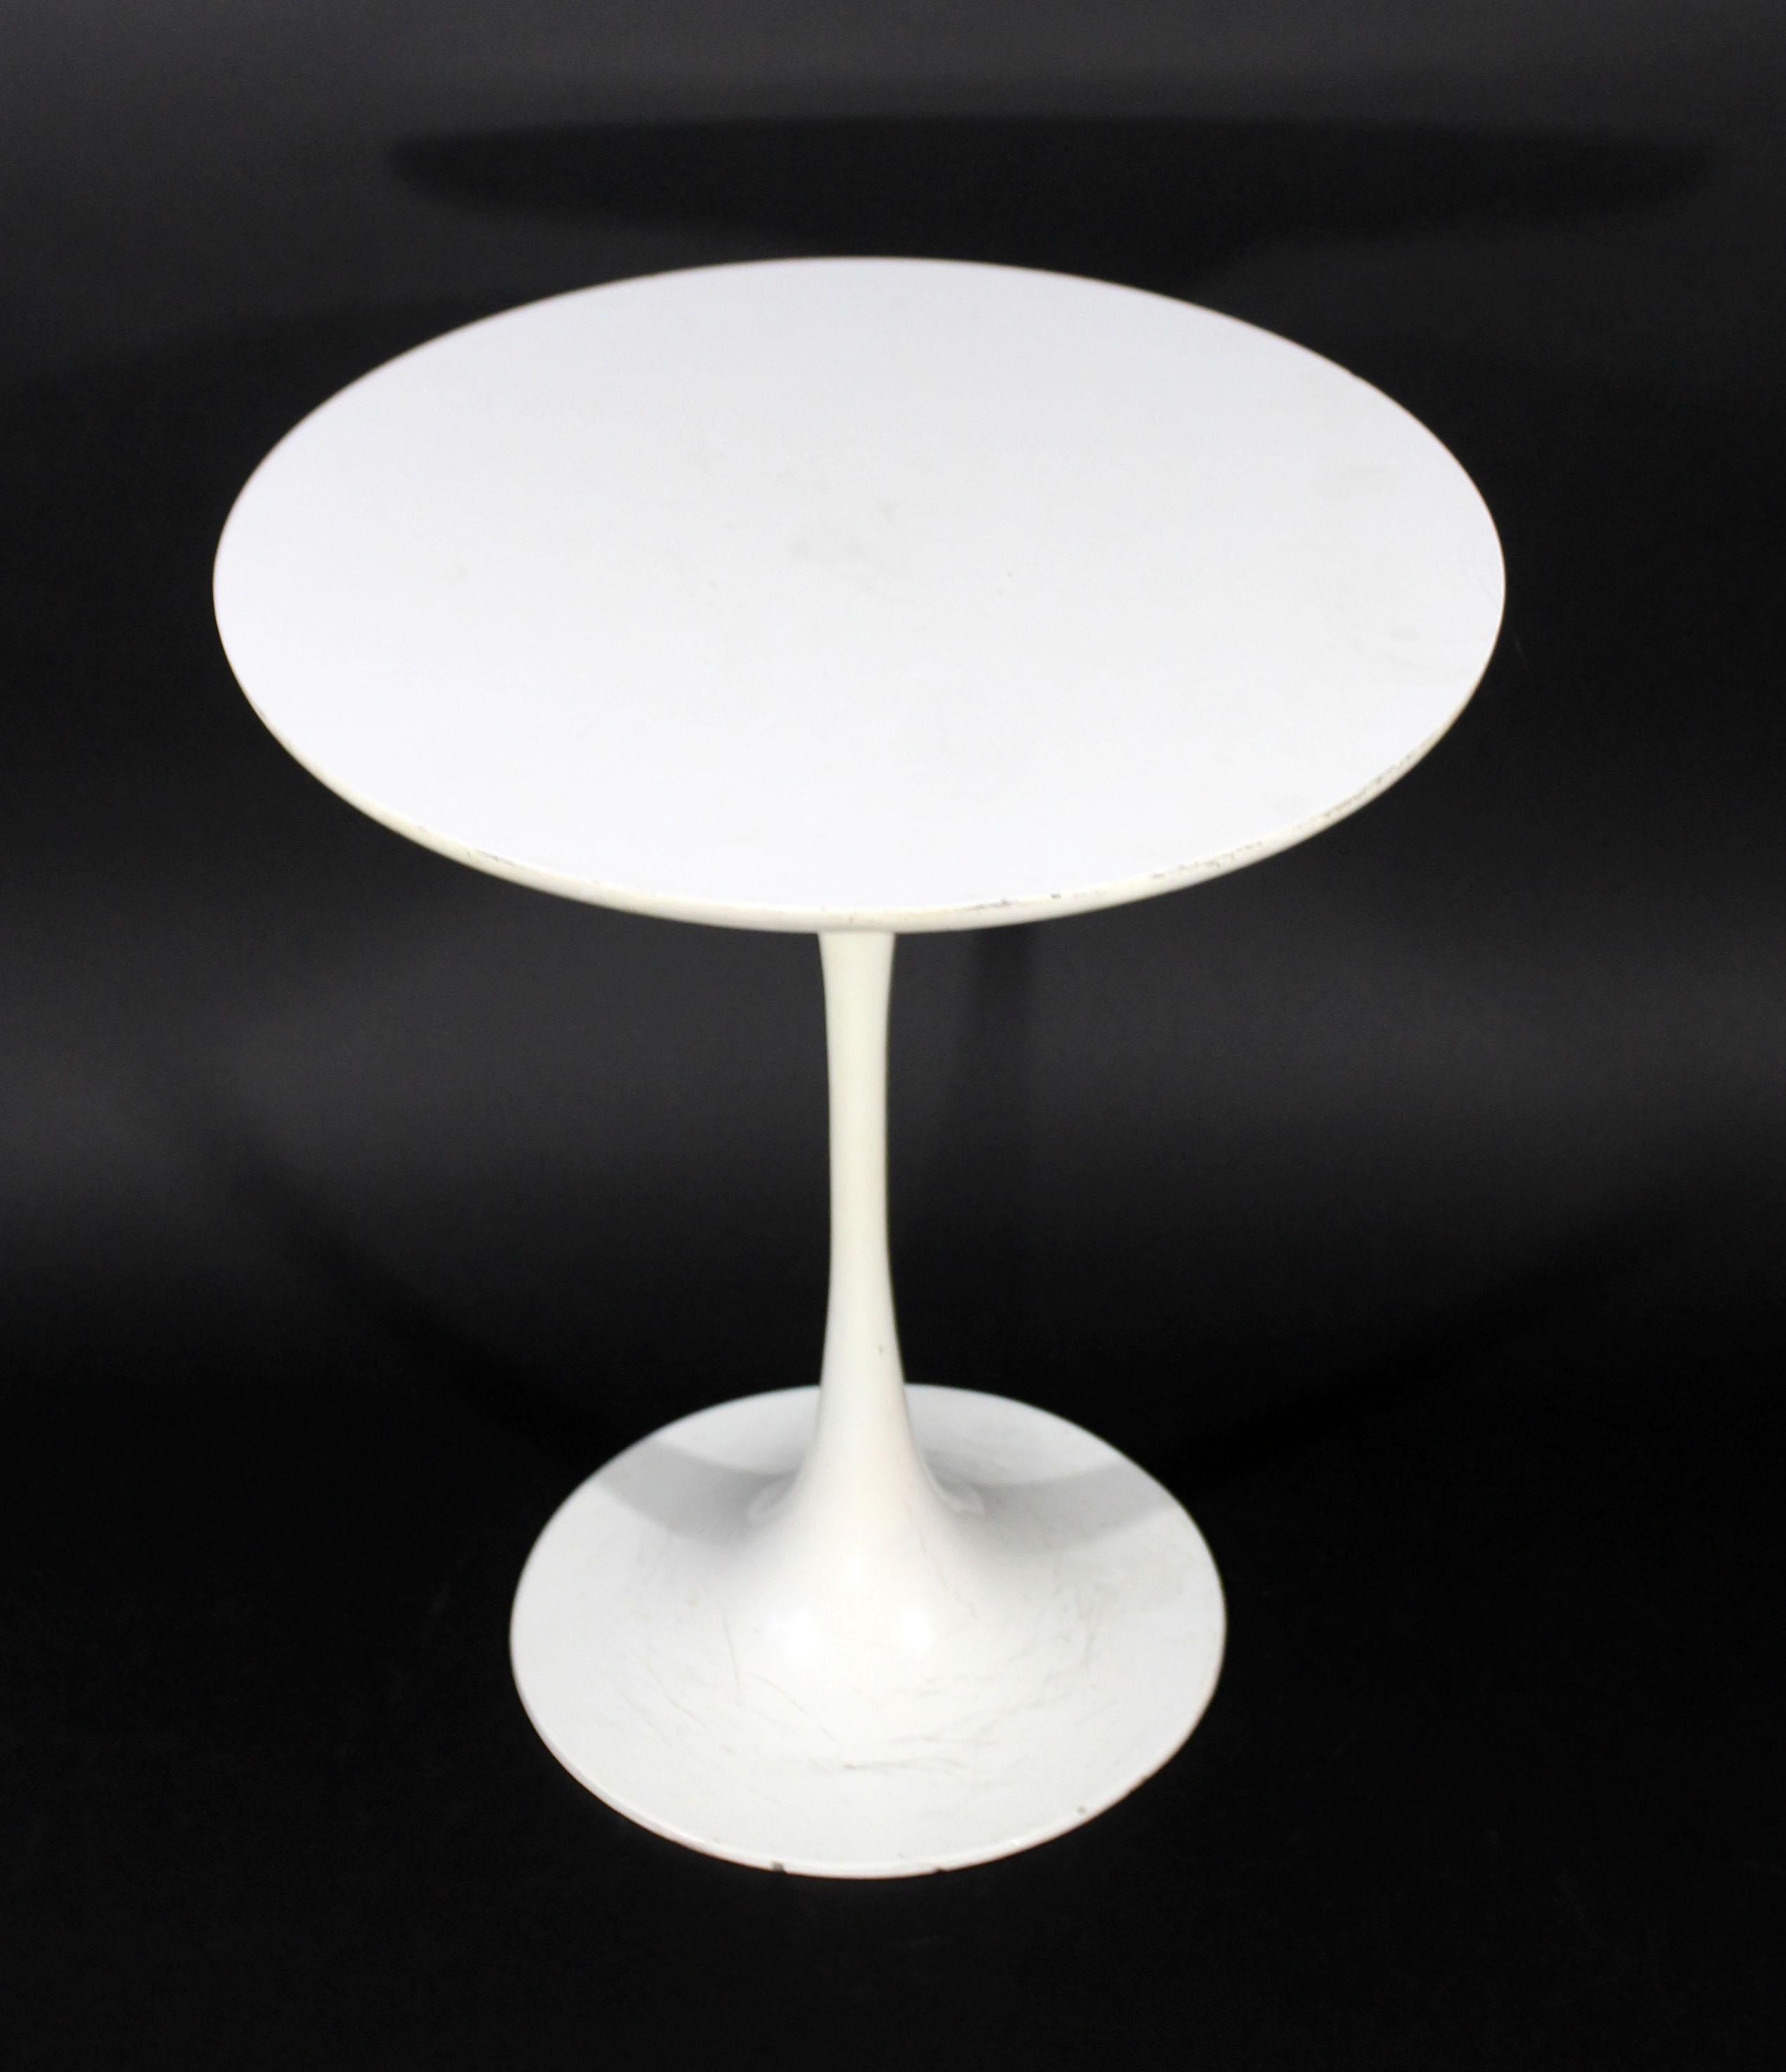 For your consideration is a wonderful, Eero Saarinen for Knoll, white, tulip shaped, side or end table, circa the 1960s. In good vintage condition. The dimensions are 17.5